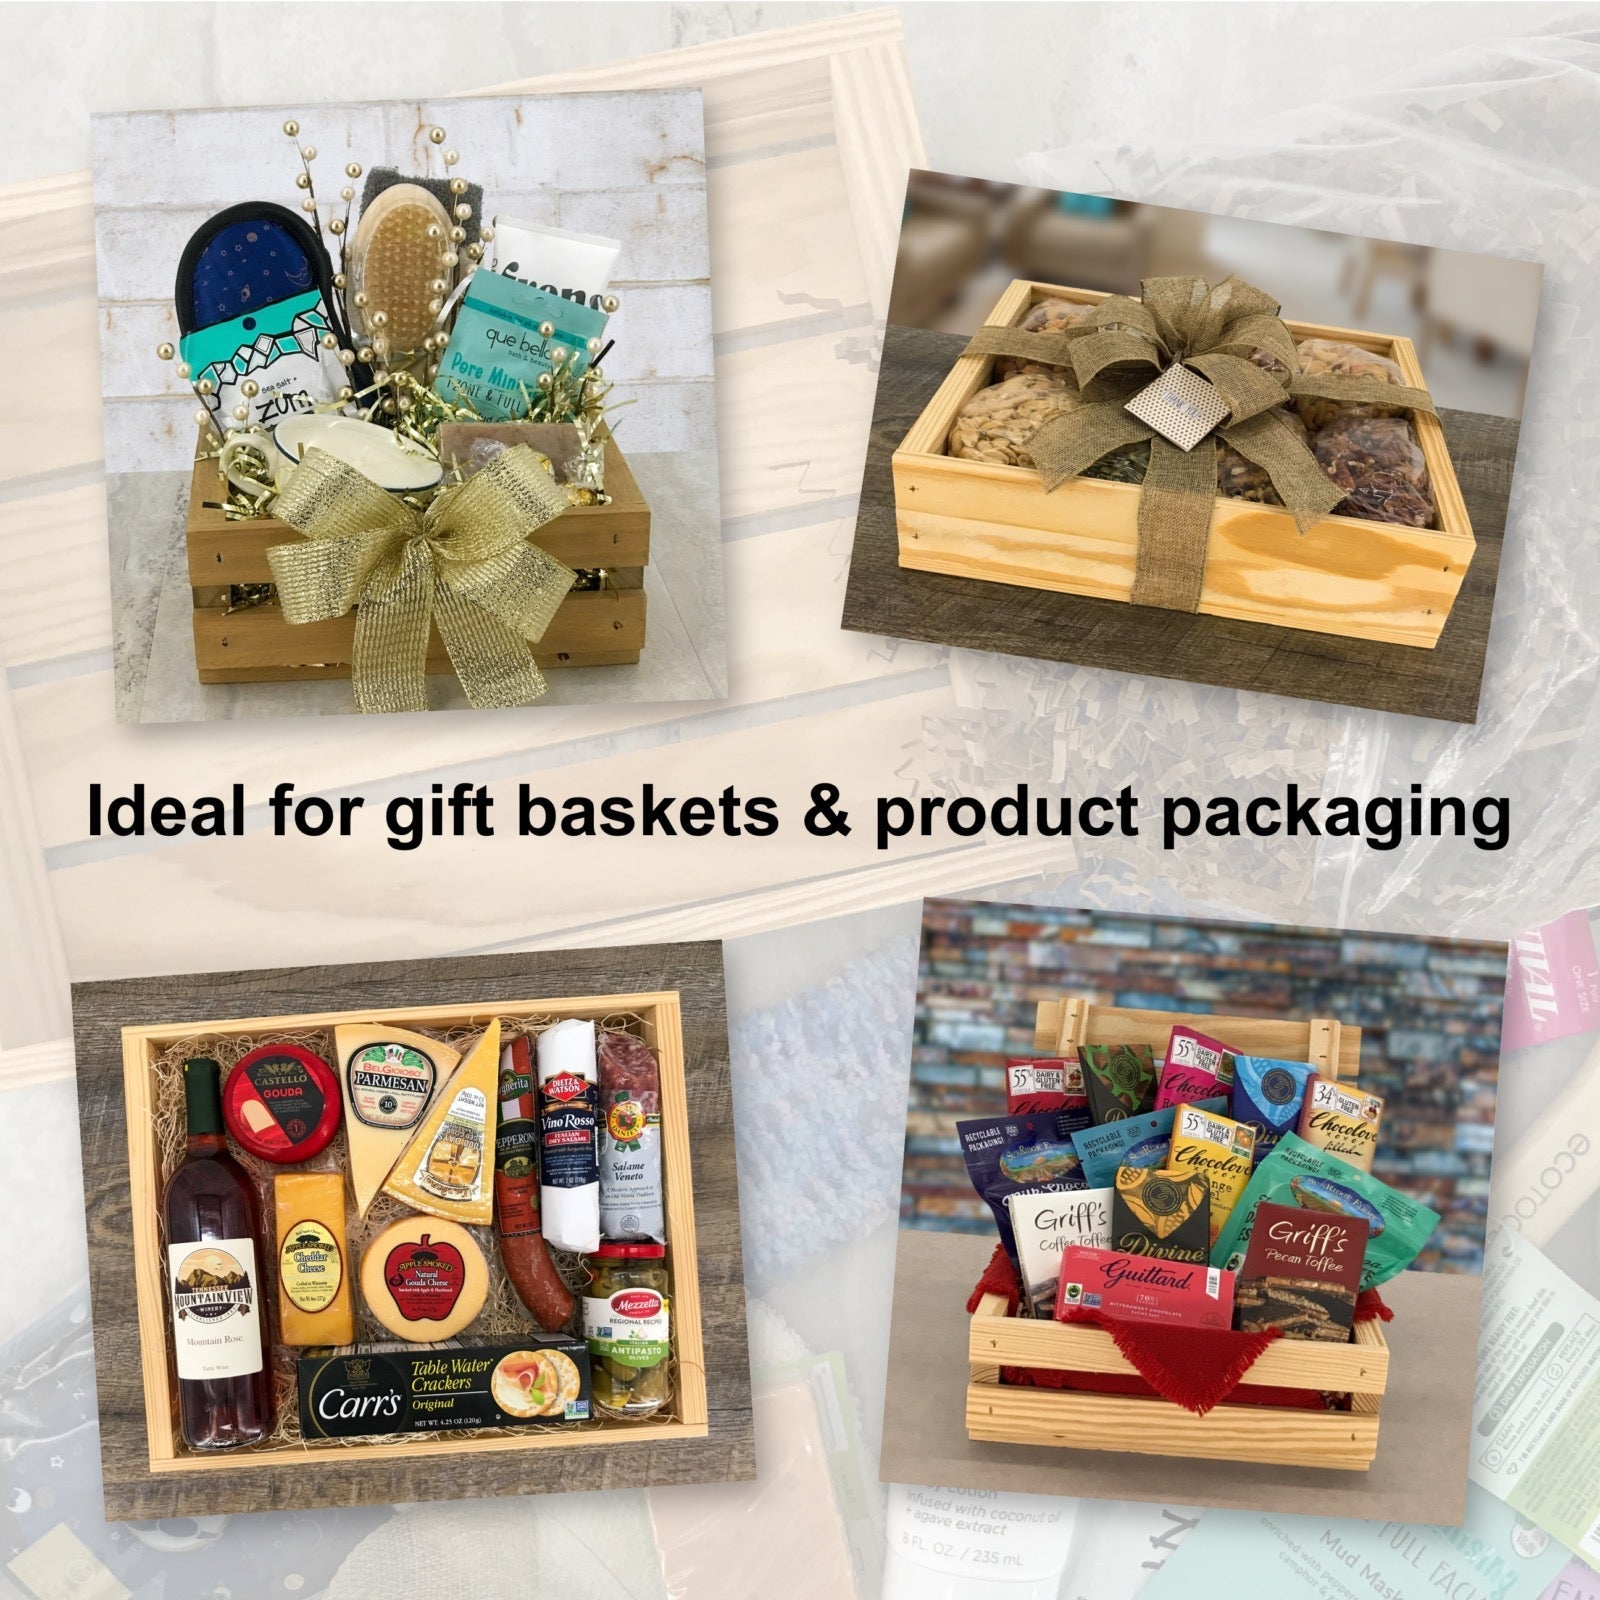 Ideal for gift baskets and product packaging, SS-10-8-4.5-ST-NW-NL, 6-SS-10-8-4.5-ST-NW-NL, 12-SS-10-8-4.5-ST-NW-NL, 24-SS-10-8-4.5-ST-NW-NL, 48-SS-10-8-4.5-ST-NW-NL, 96-SS-10-8-4.5-ST-NW-NL